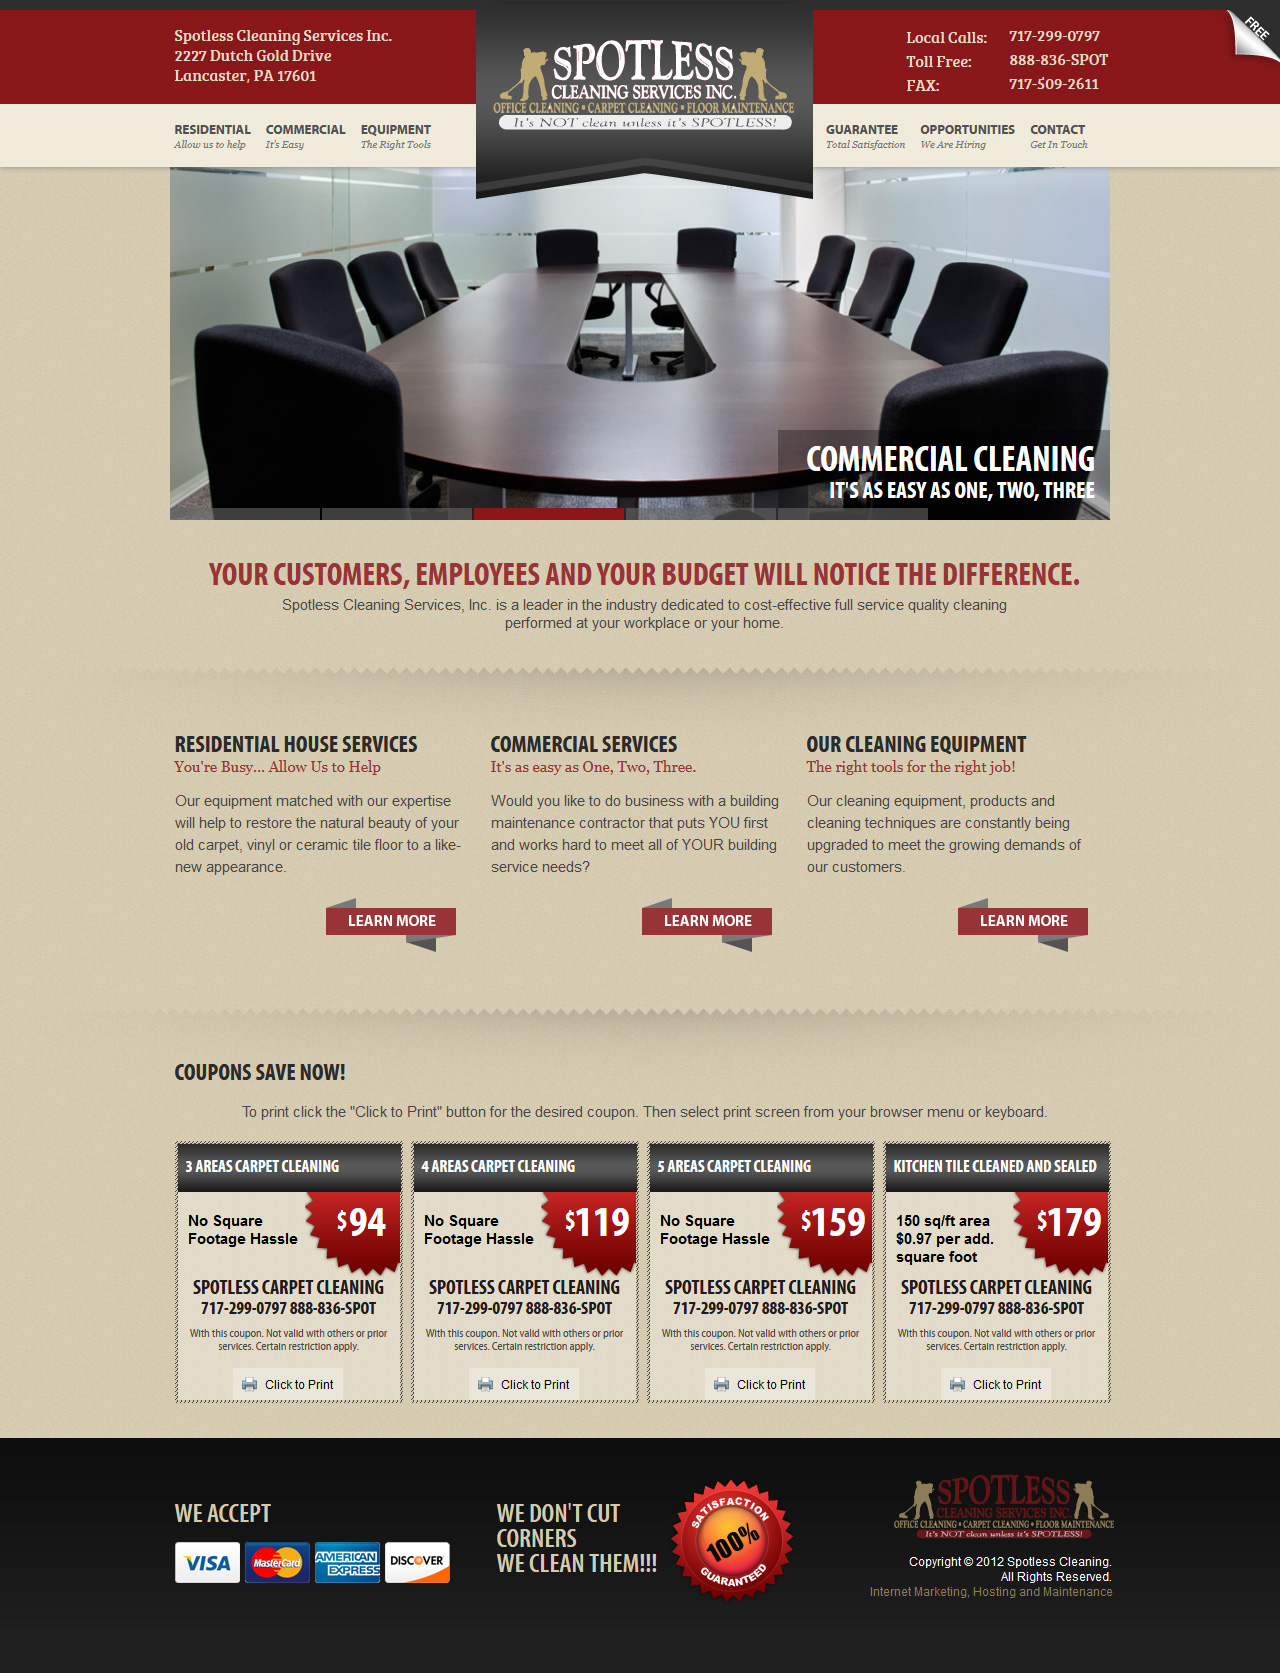 Spotless Cleaning Services Inc. - Cleaning service website design